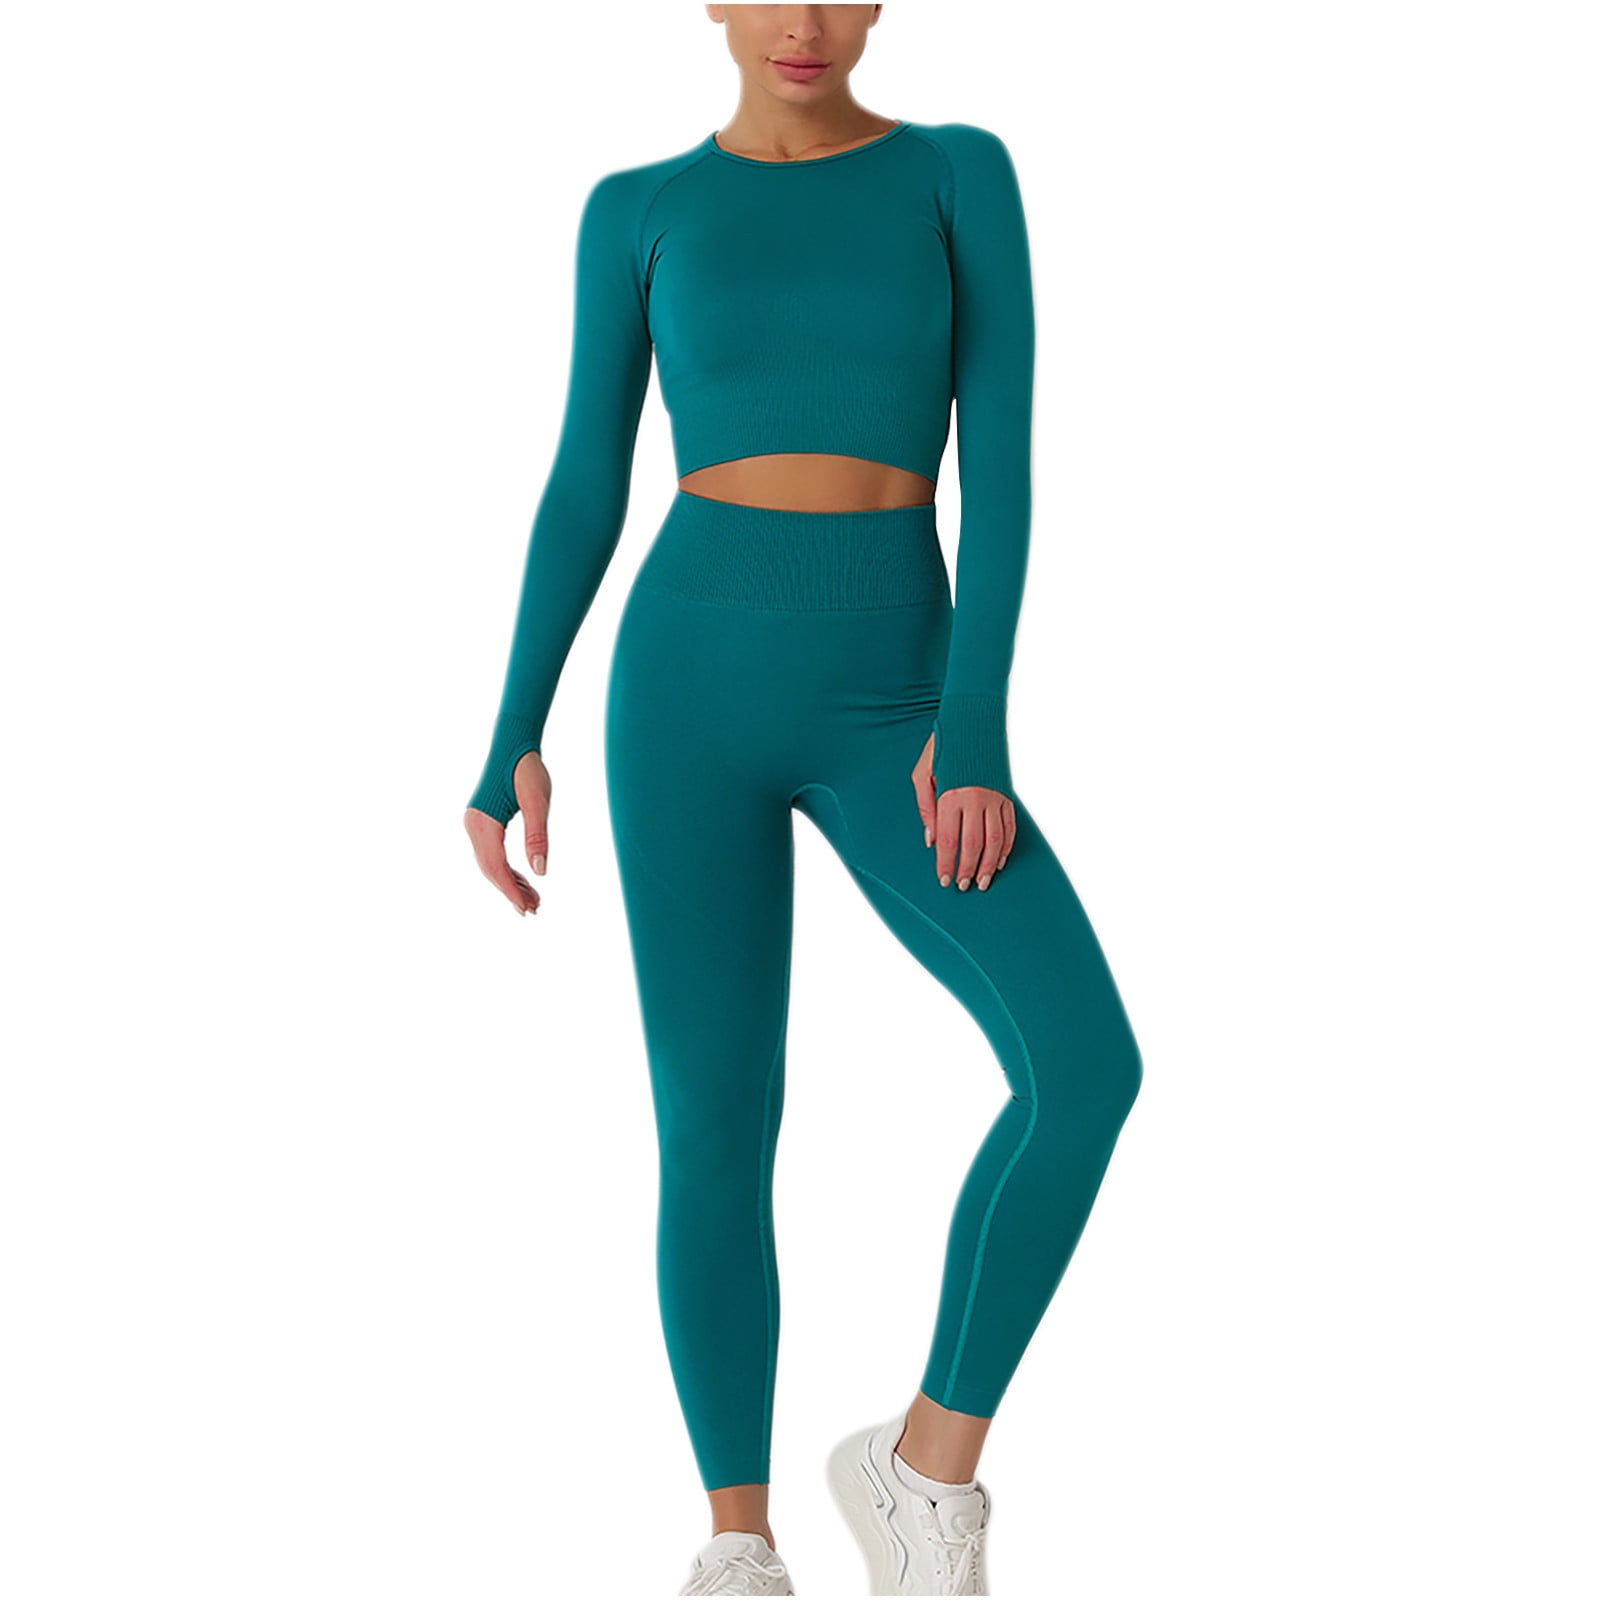 Seamless Workout Outfits for Women 2 Piece Ribbed Long Sleeve Crop Top  Tummy Control High Waist Leggings Sets Casual Bodycon Outfit Set